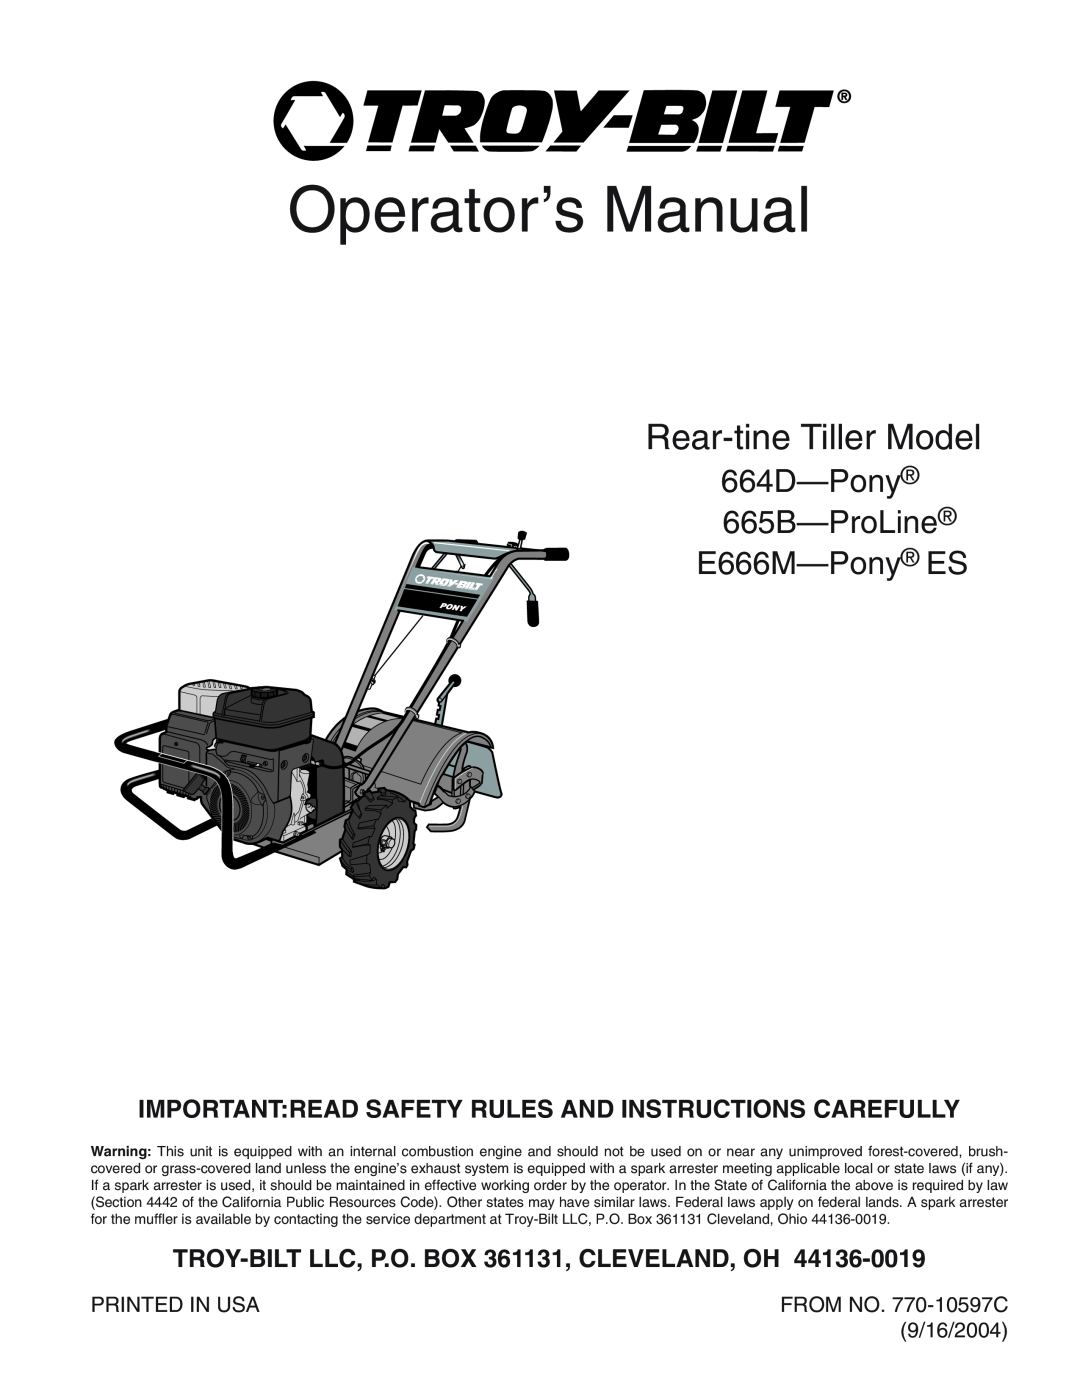 Troy-Bilt 664Dpony manual Importantread Safety Rules And Instructions Carefully, Operator’s Manual, Rear-tine Tiller Model 